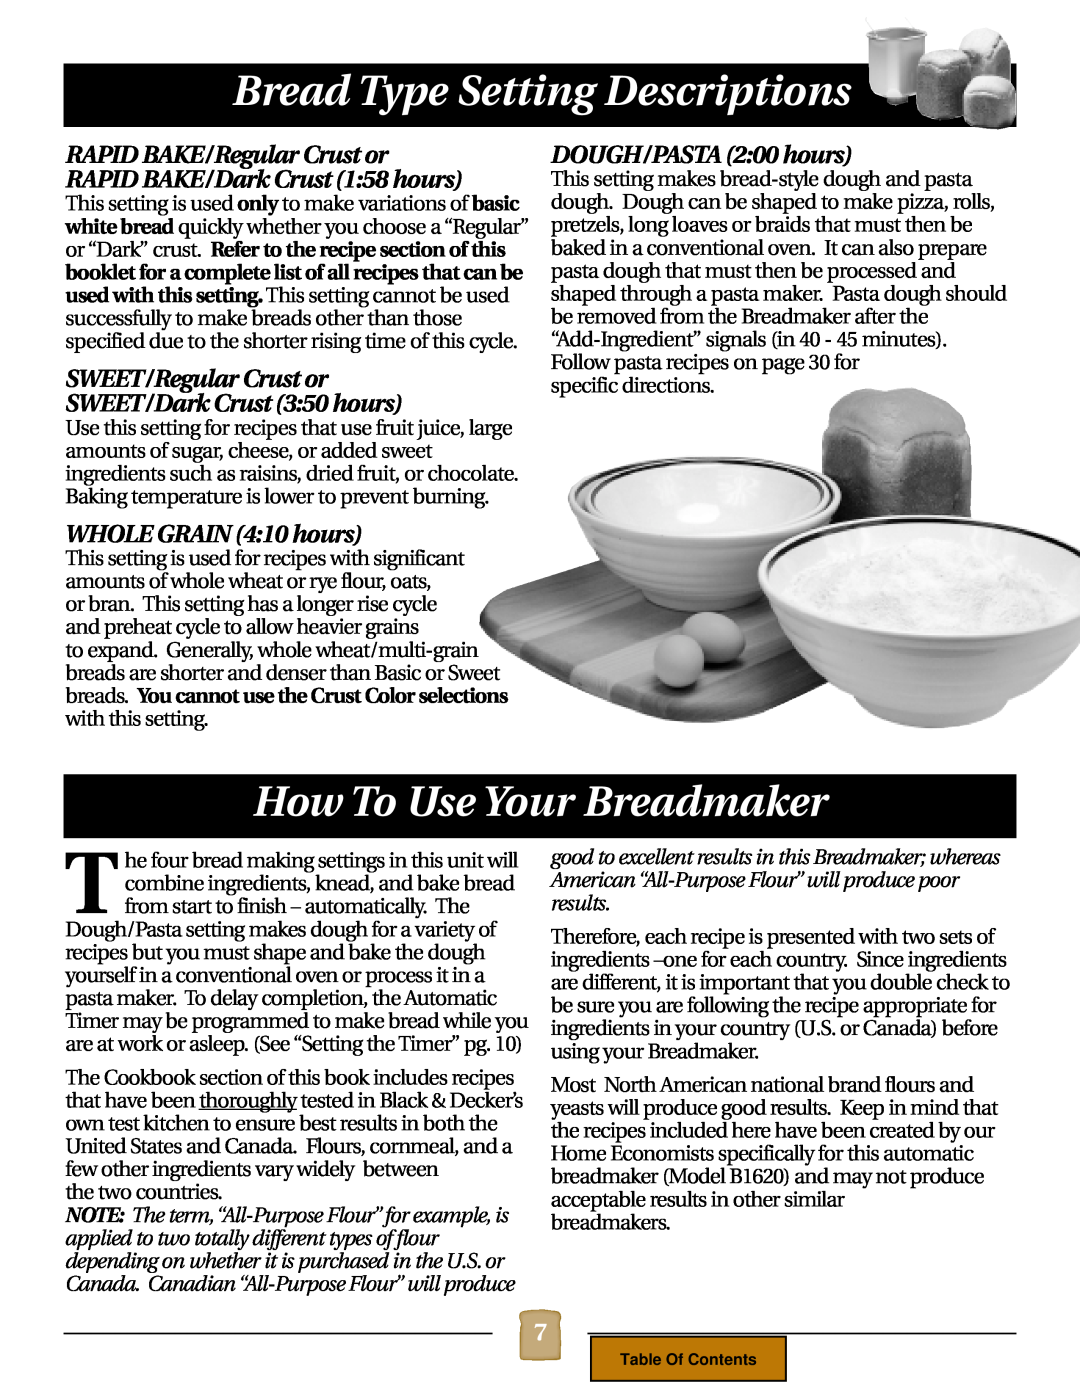 Black & Decker B1620 manual How To Use Your Breadmaker, Bread Type Setting Descriptions, WHOLE GRAIN 410 hours 